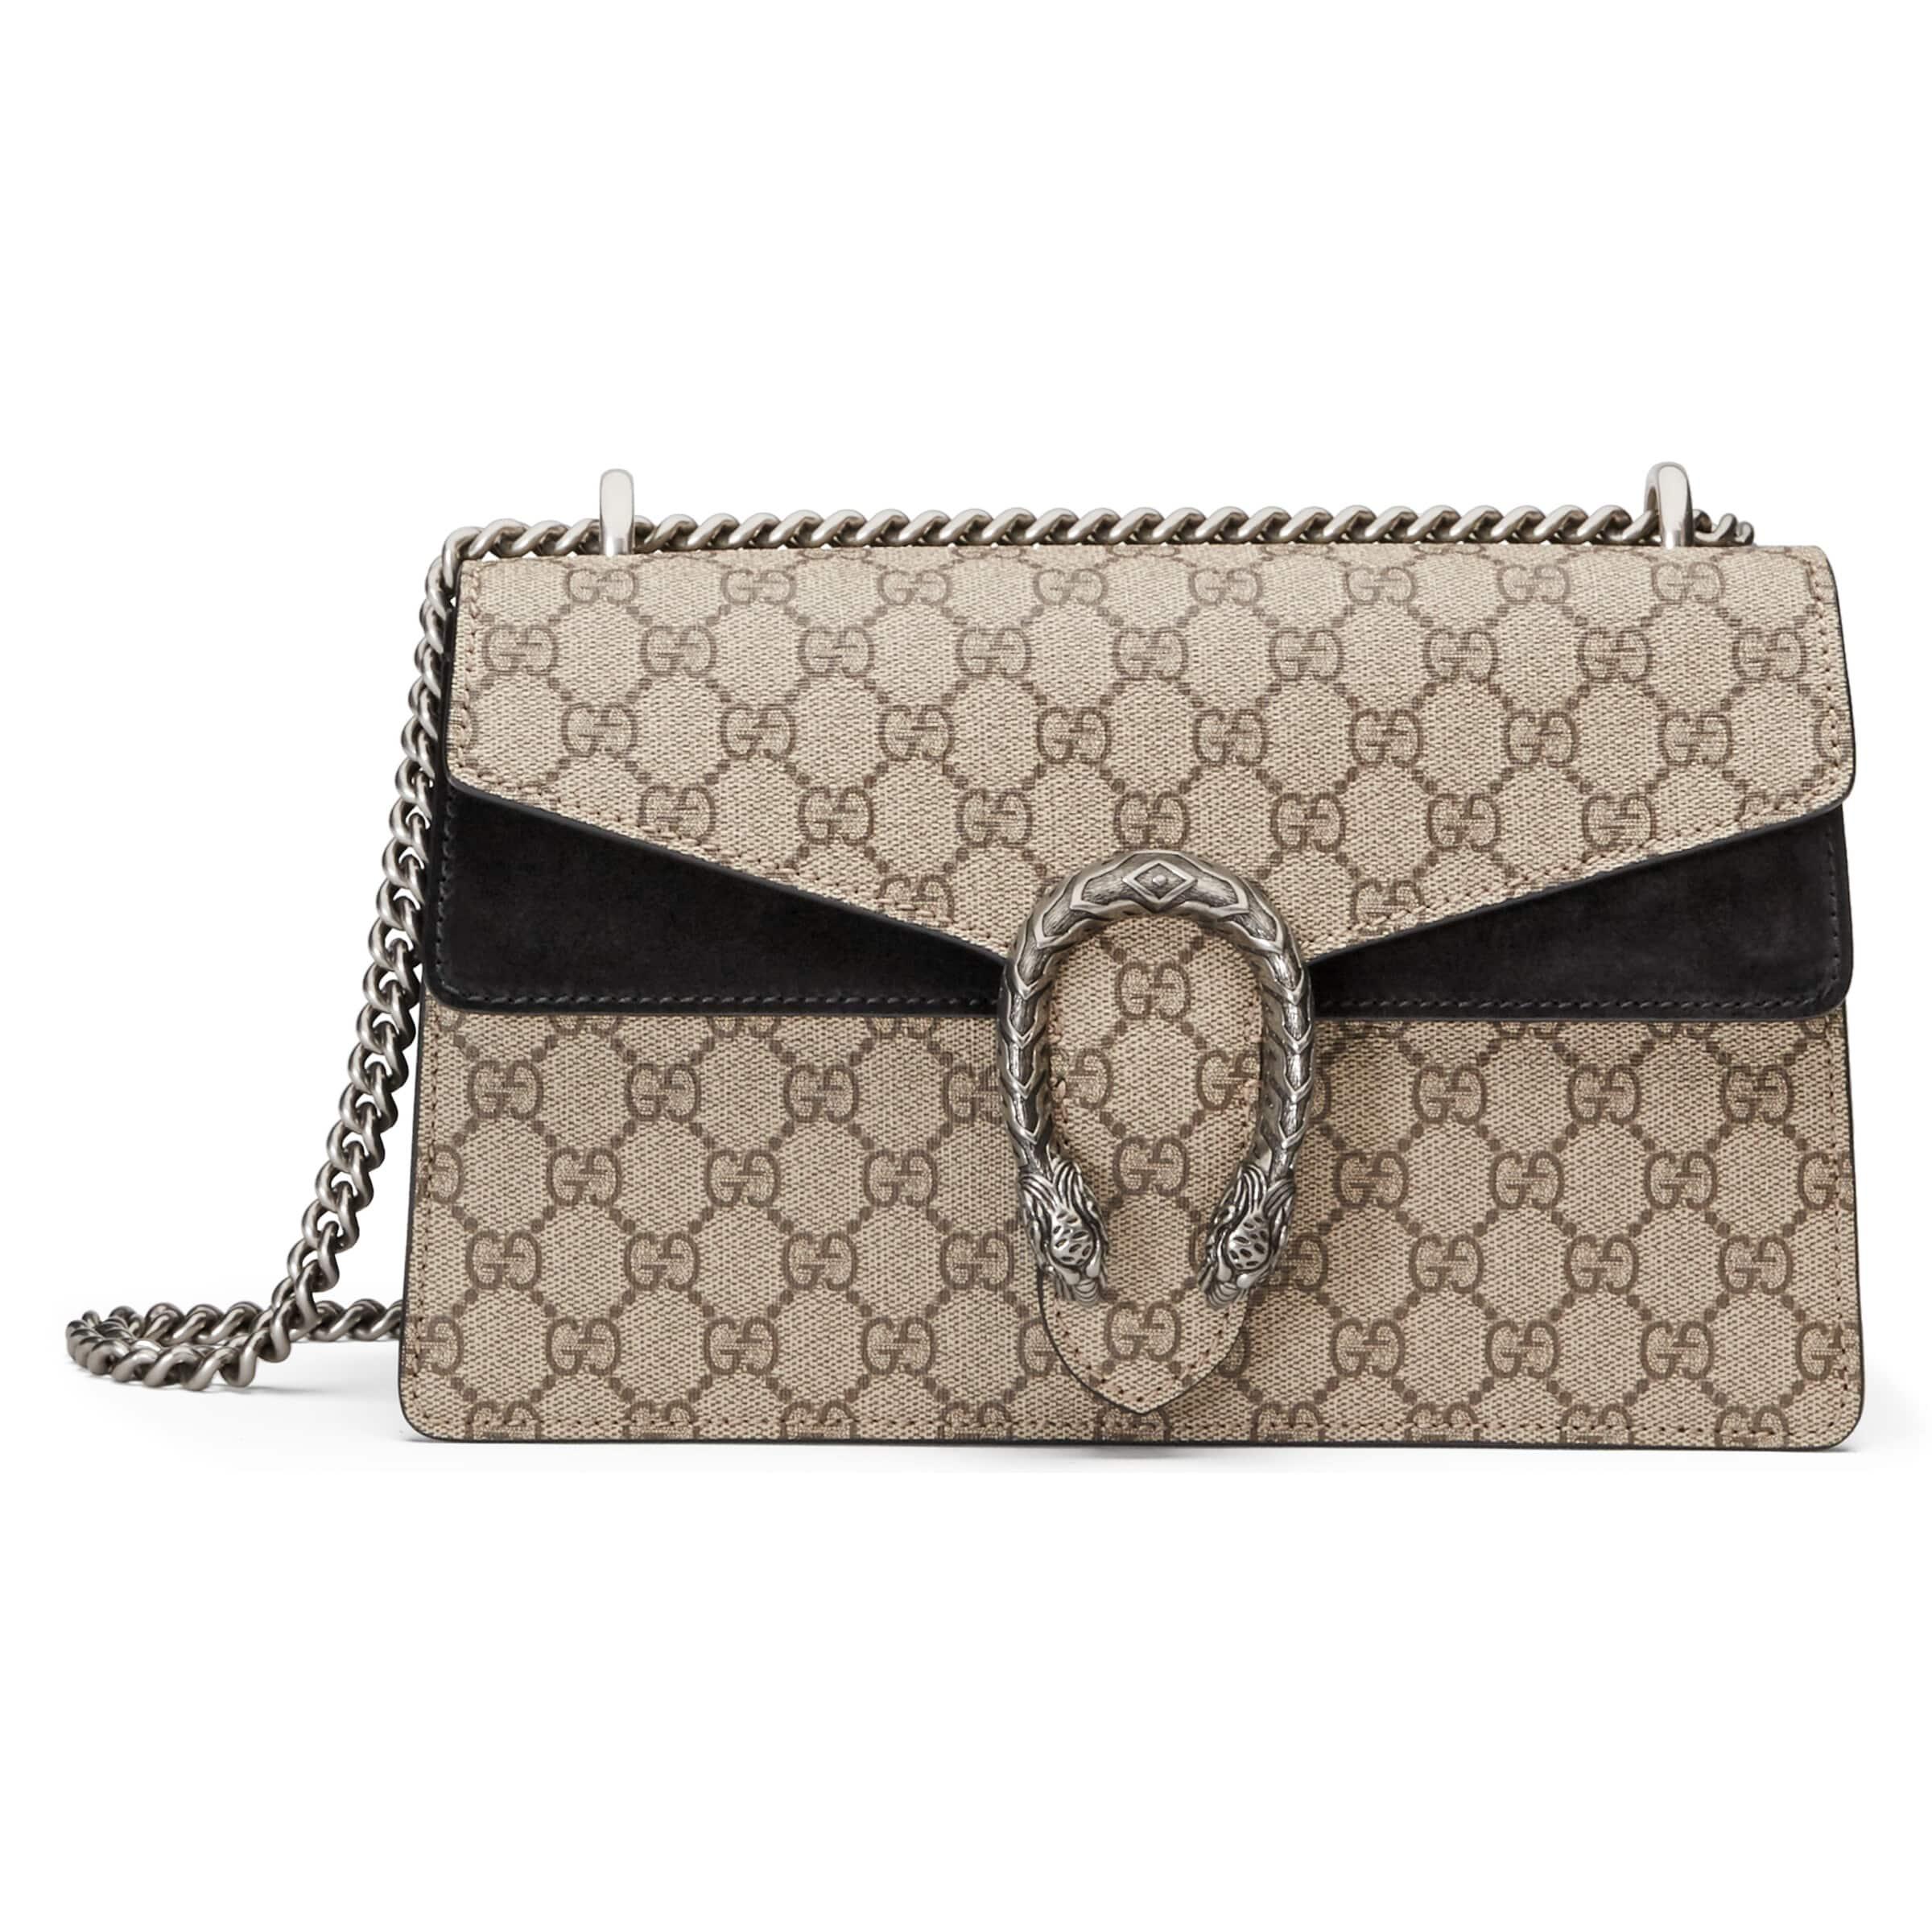 Gucci Dionysus GG Small Shoulder Bag in Natural | Lyst